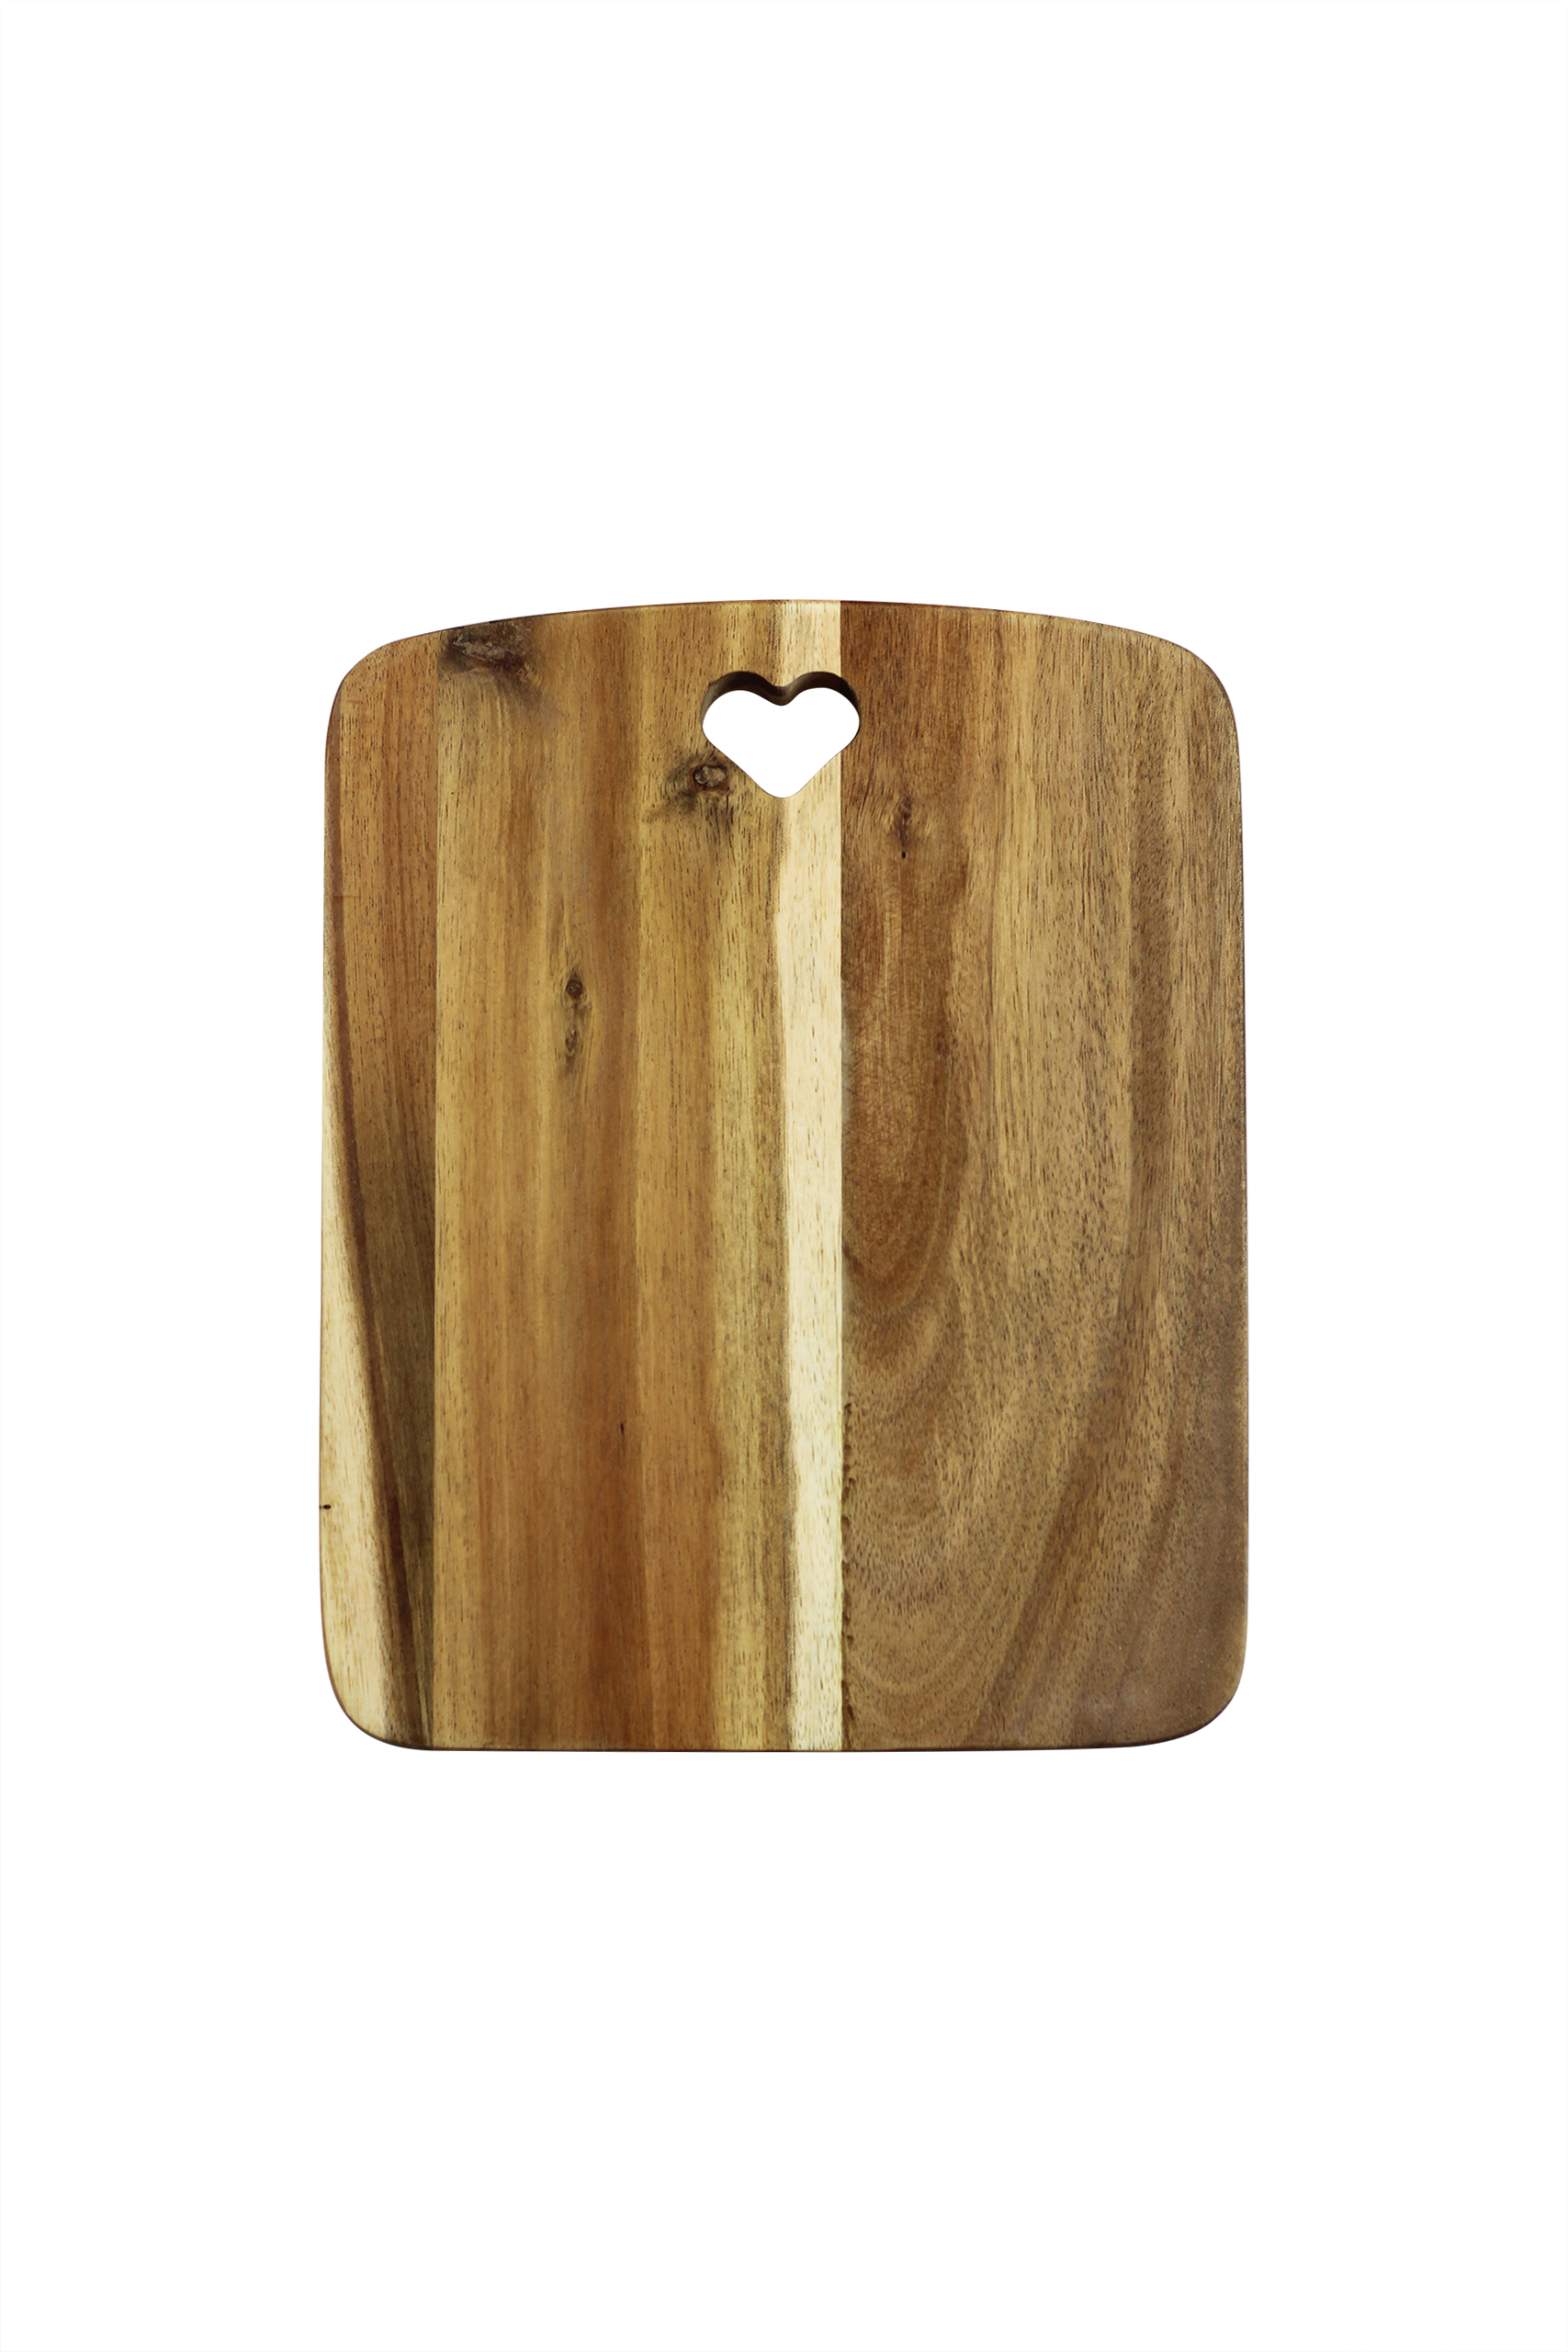 Natural Acacia Heart Chopping Boards - Small | Pretty Little Home